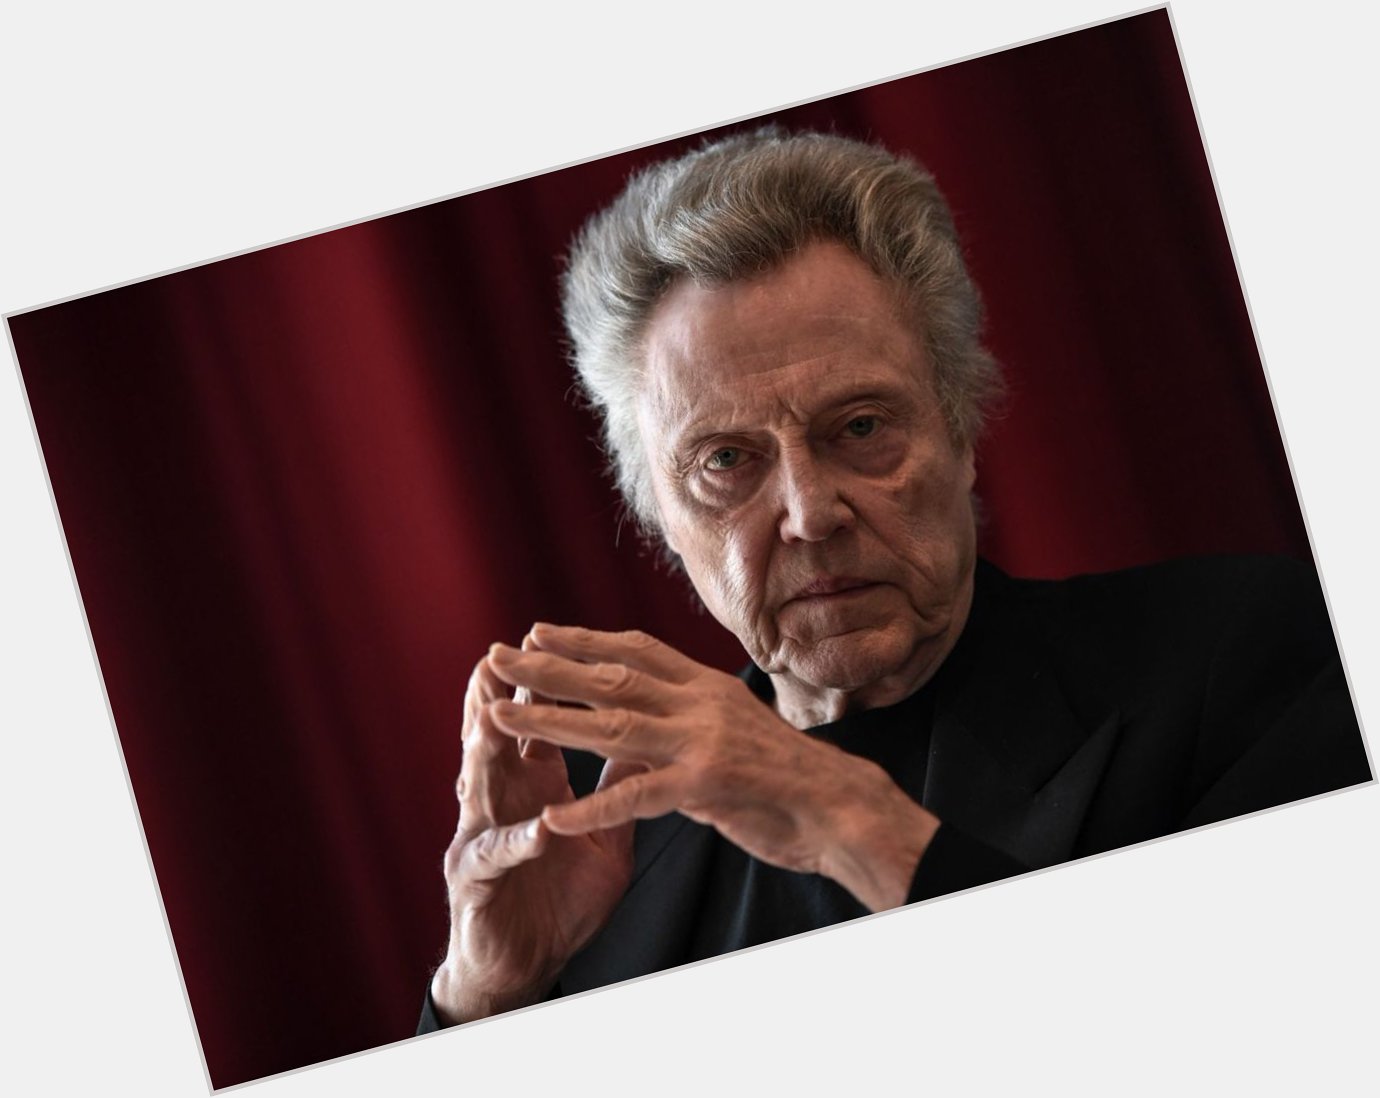 Often imitated but never duplicated. A very happy 77th birthday to the singular Christopher Walken today. 